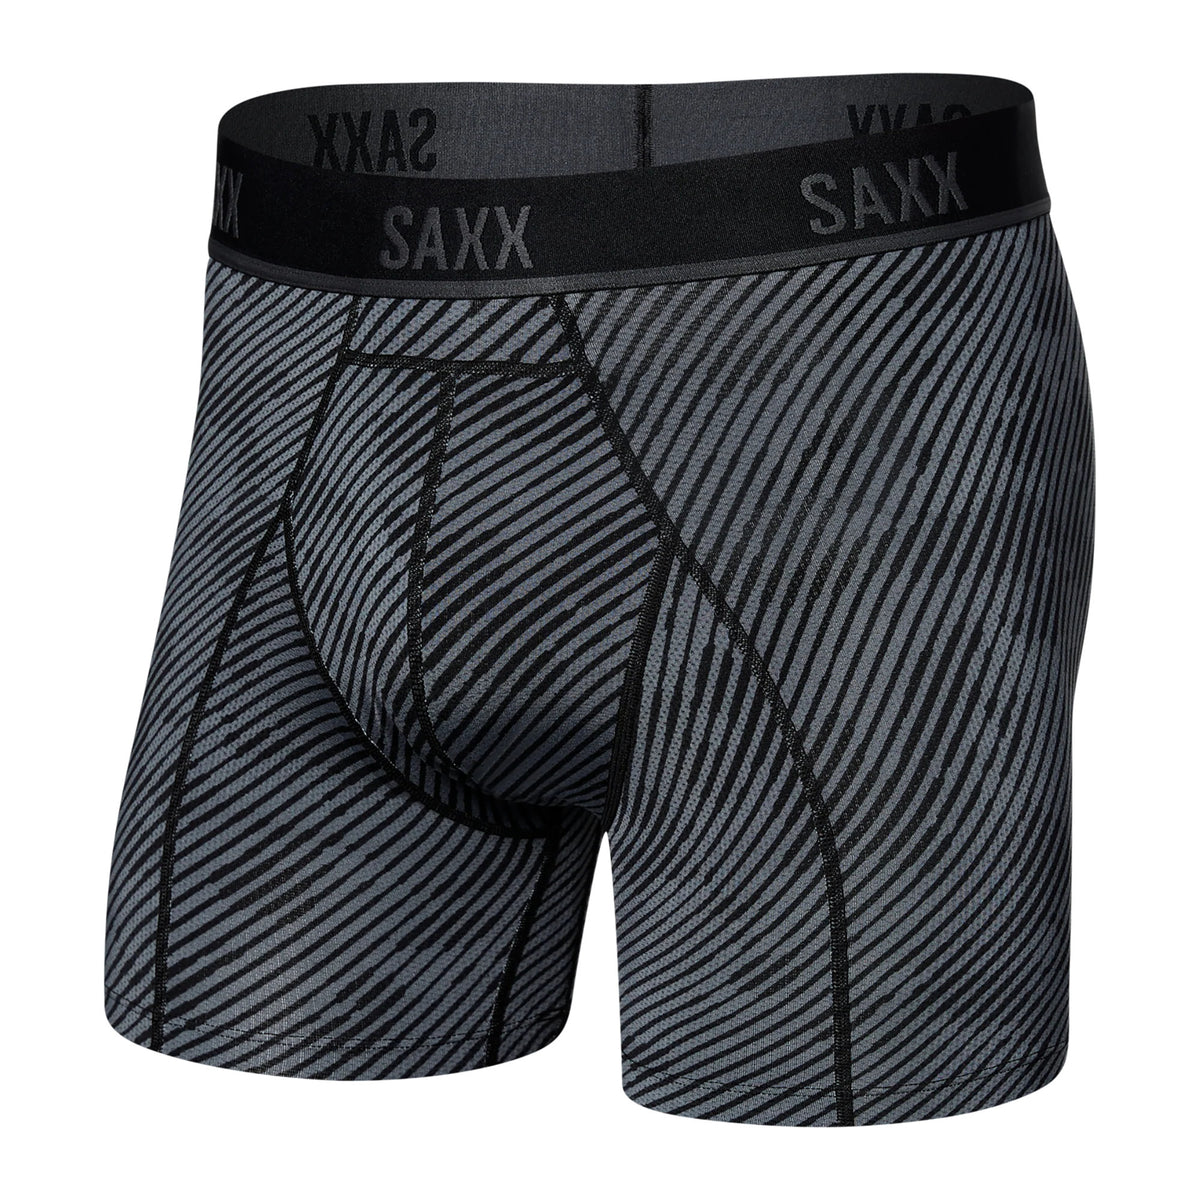 “Final Sale” Saxx Kinetic Brief - Size X-Large